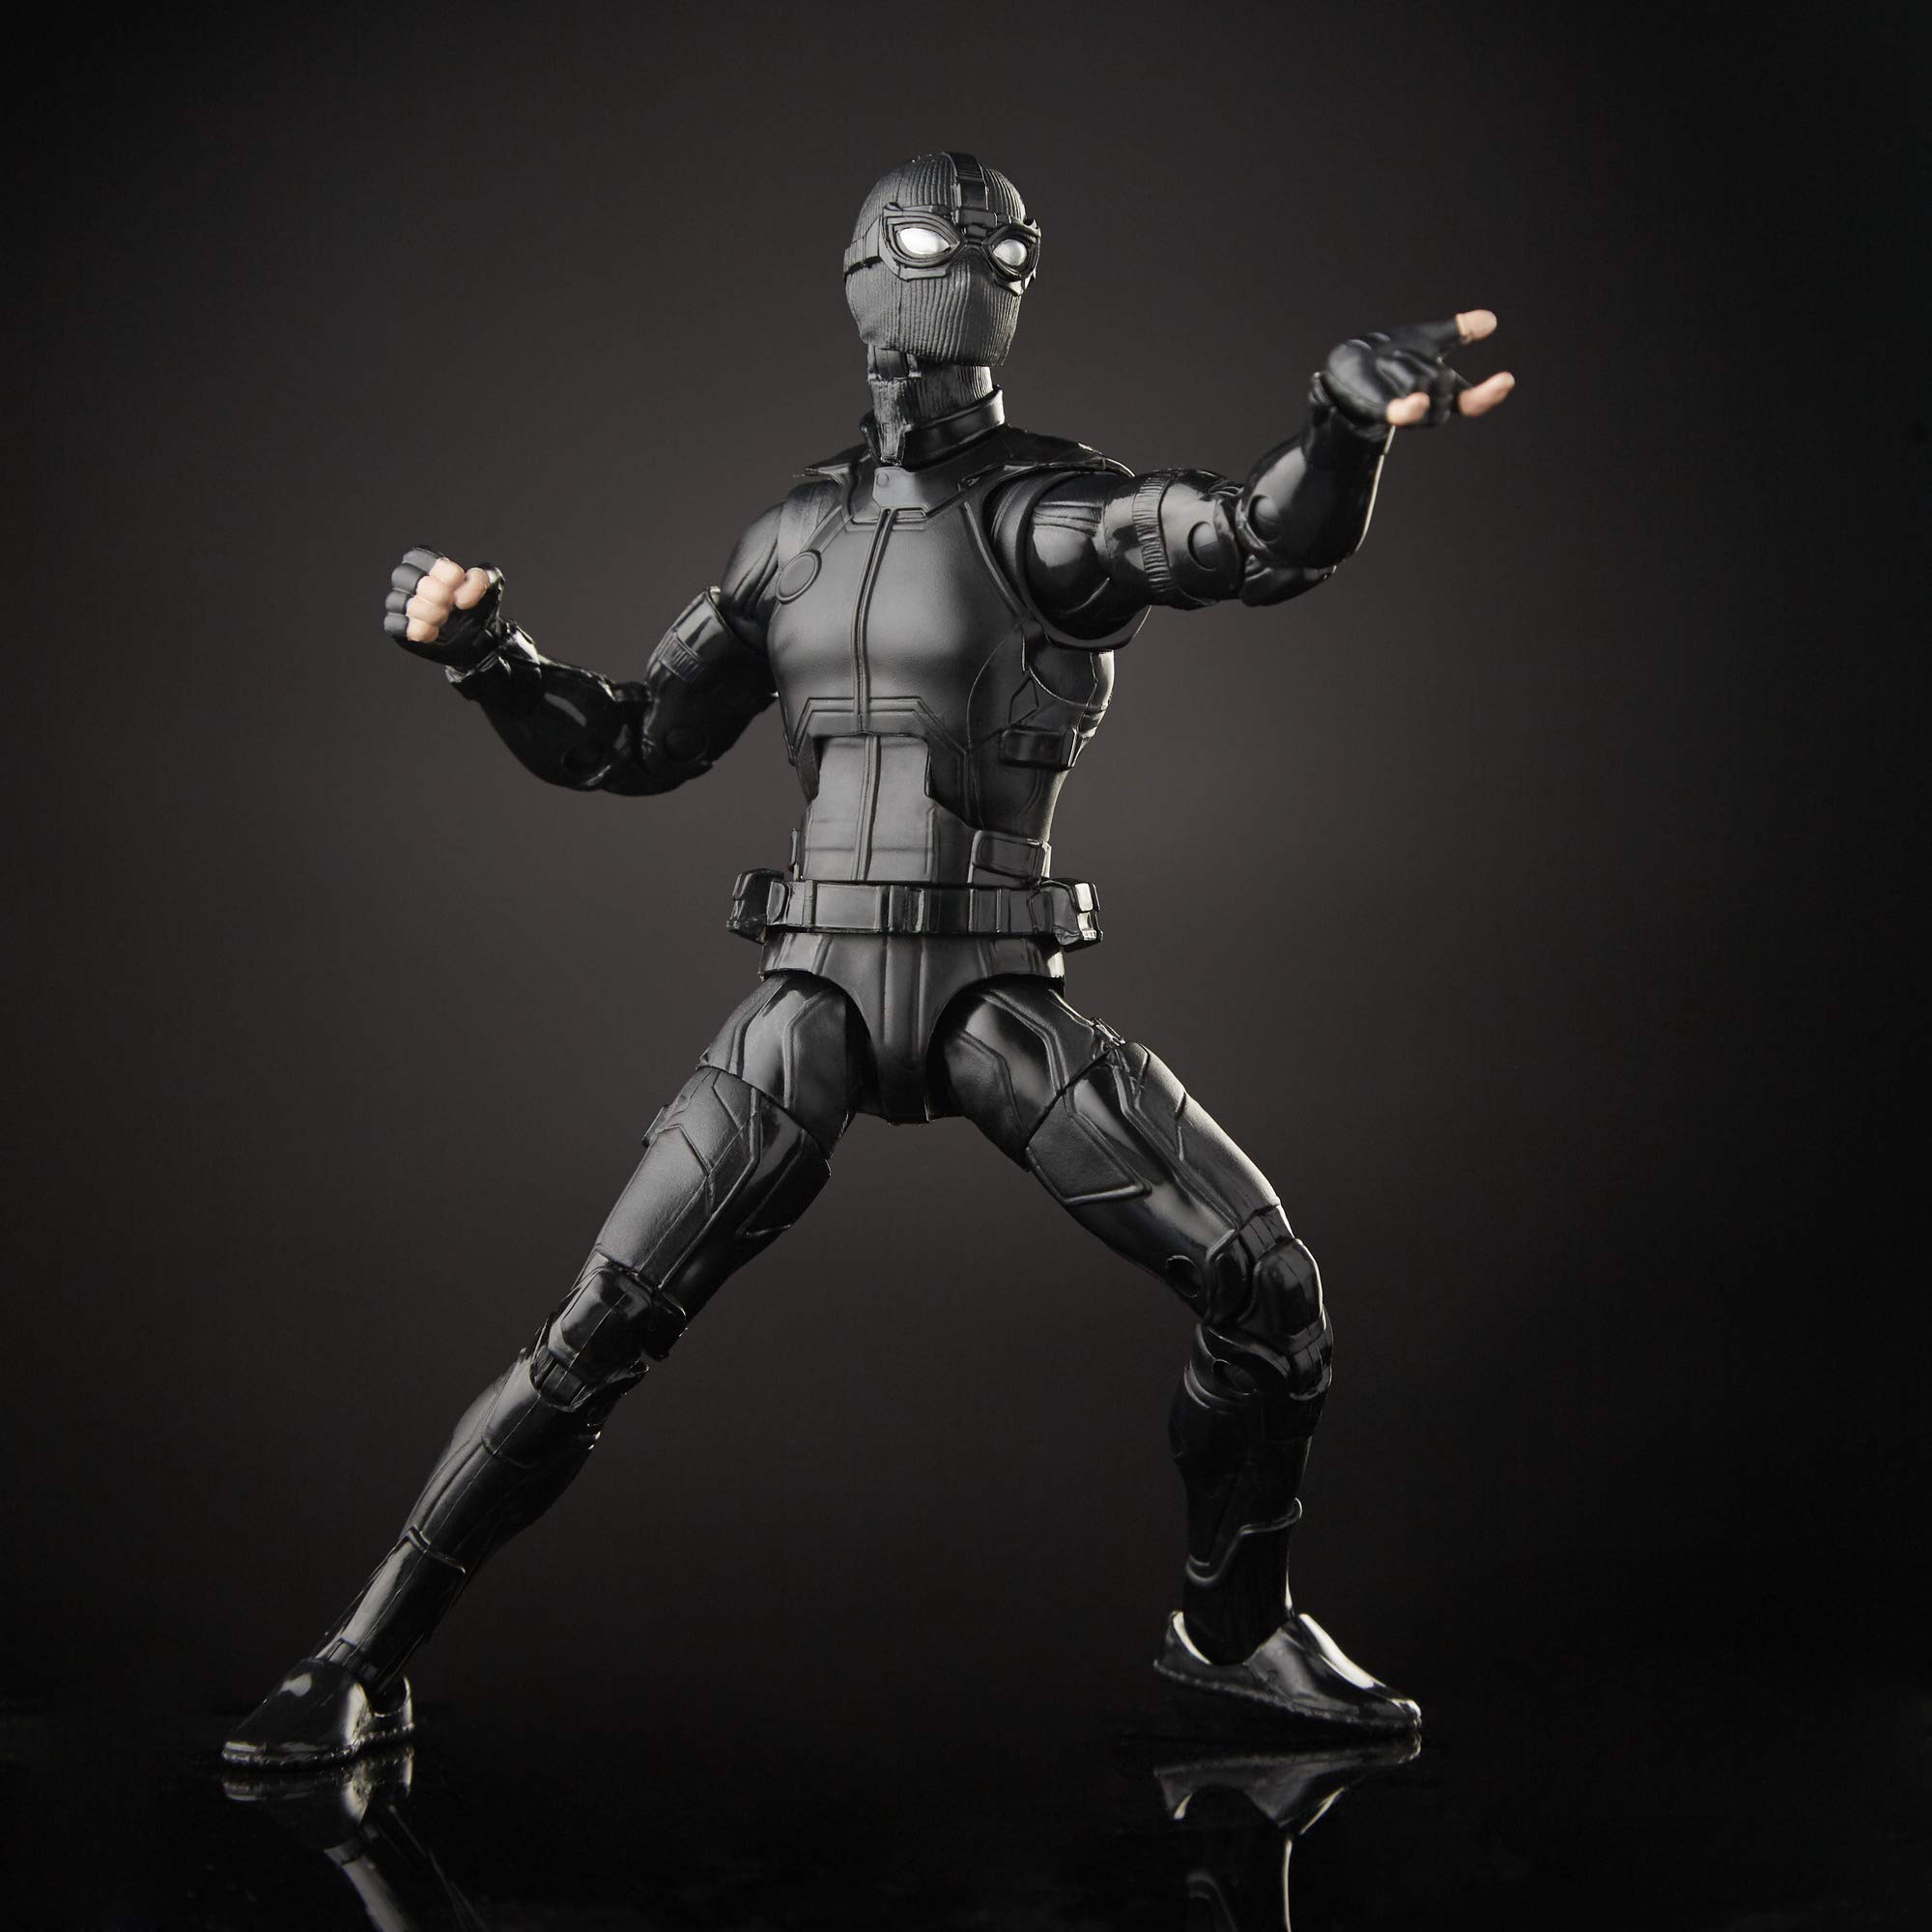 Spider-Man Marvel Legends Series Far from Home 6